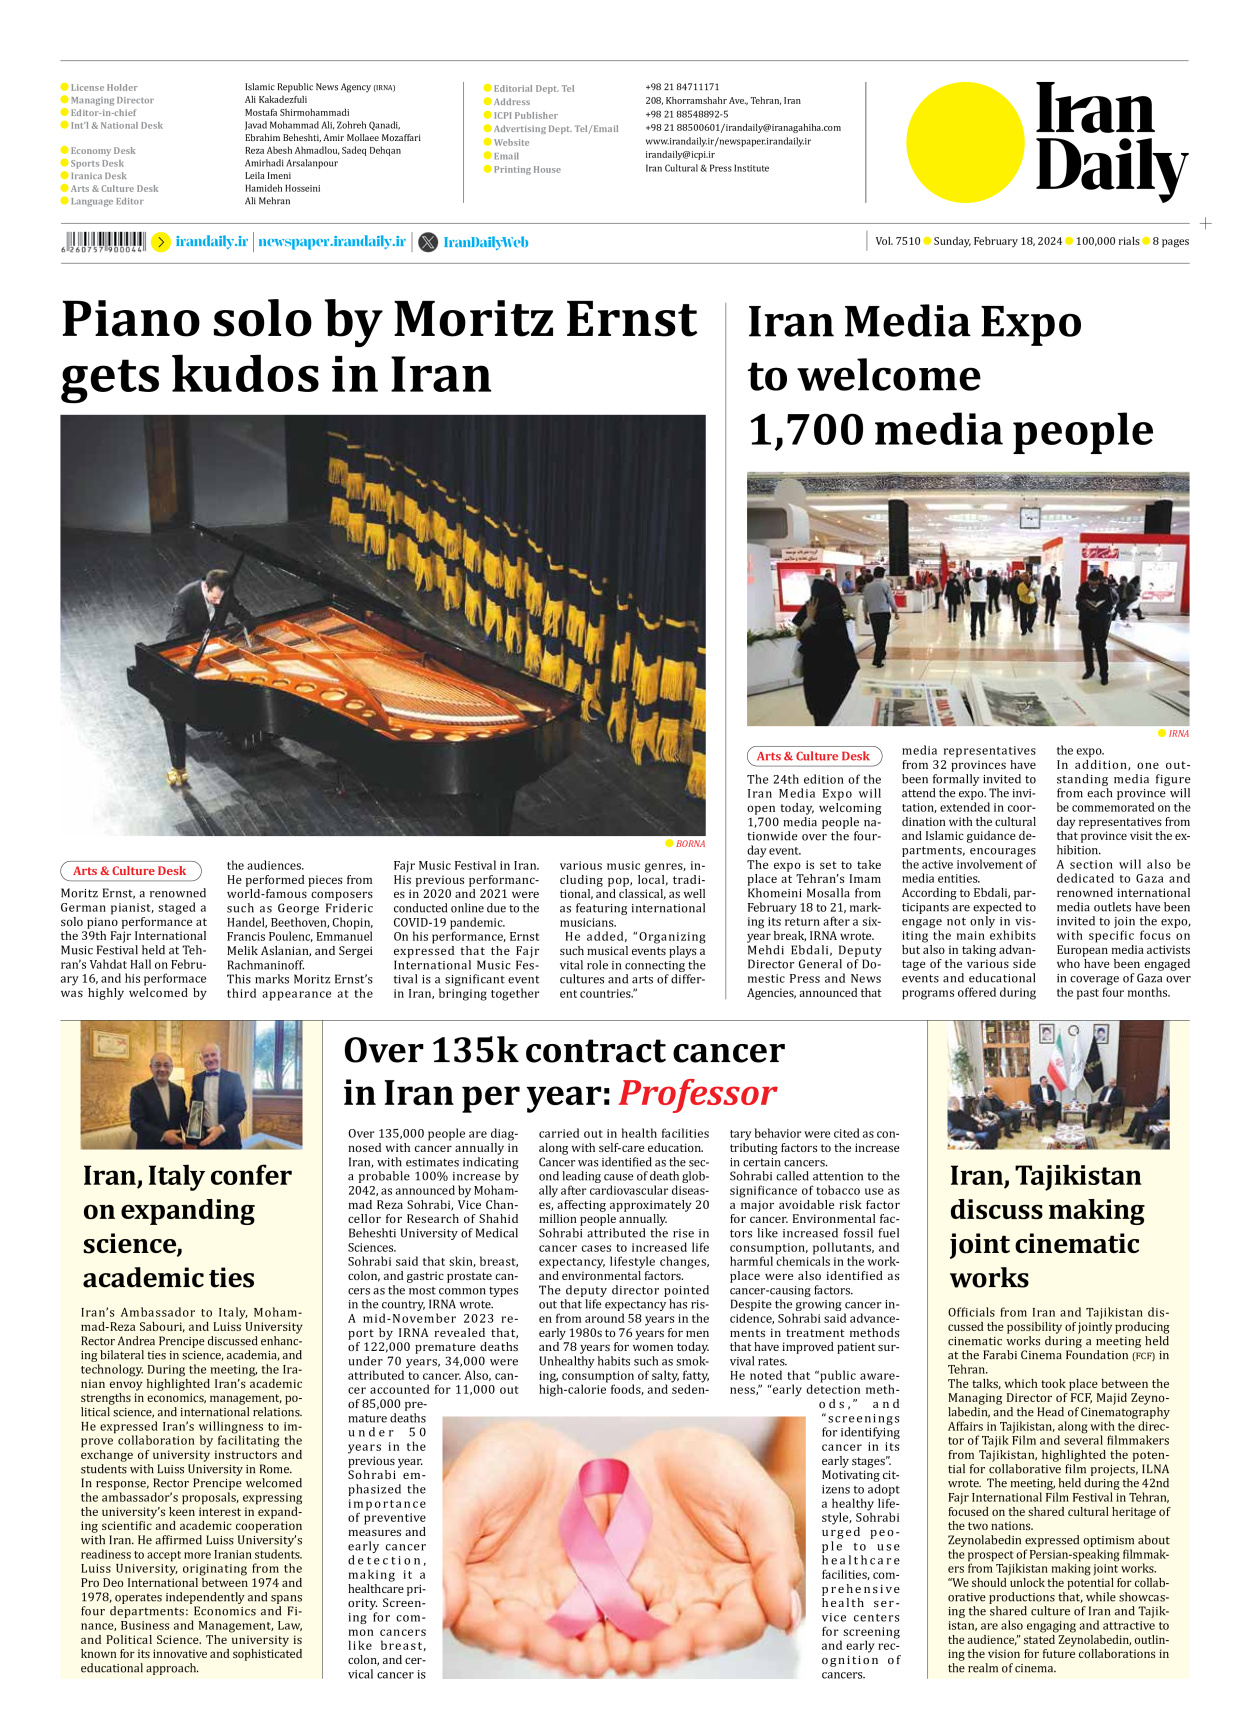 Iran Daily - Number Seven Thousand Five Hundred and Ten - 18 February 2024 - Page 8